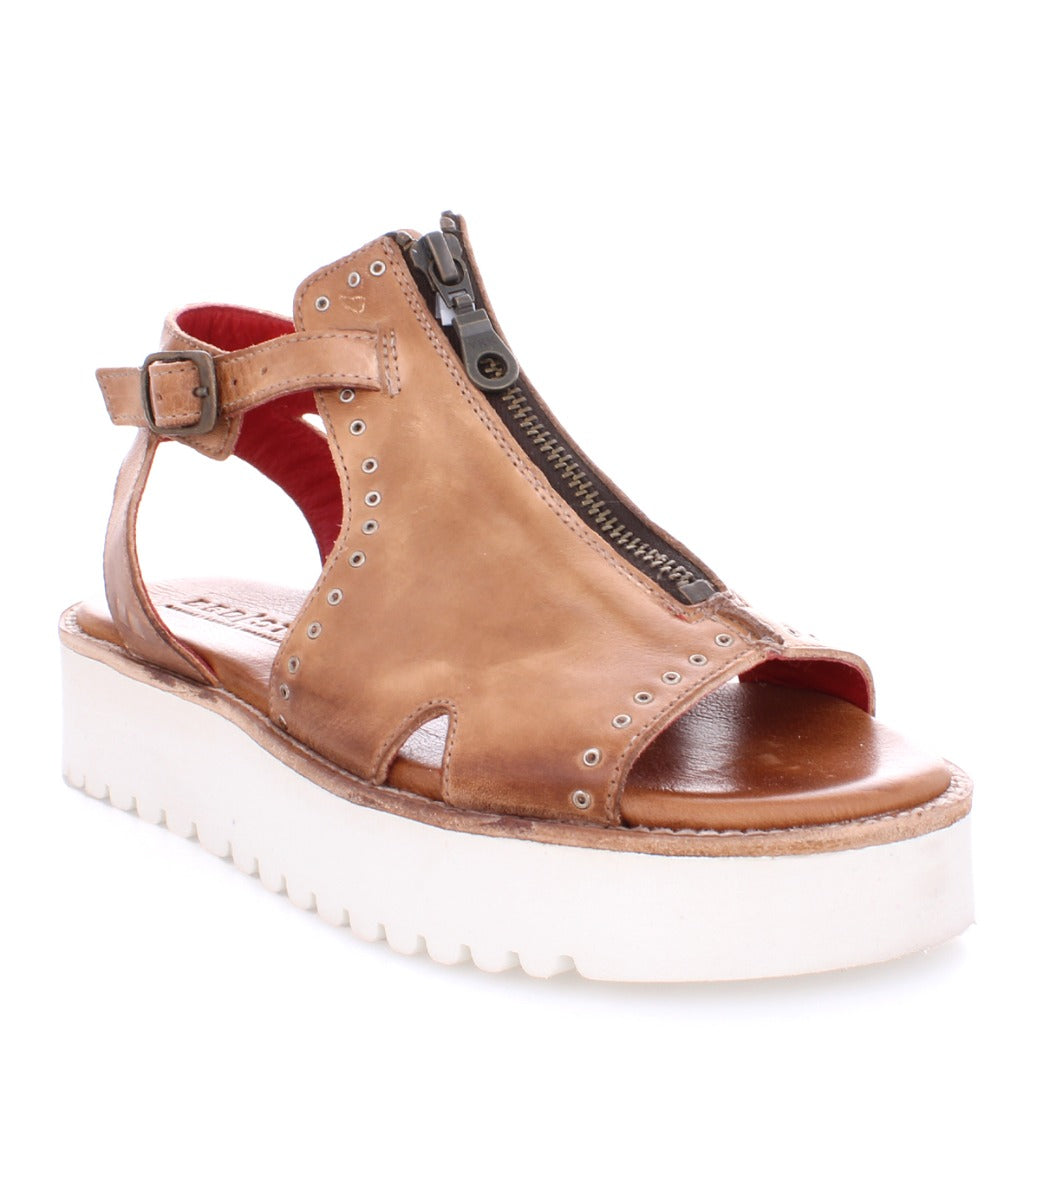 A Clancy sandal by Bed Stu, made of tan pure leather with a white sole.